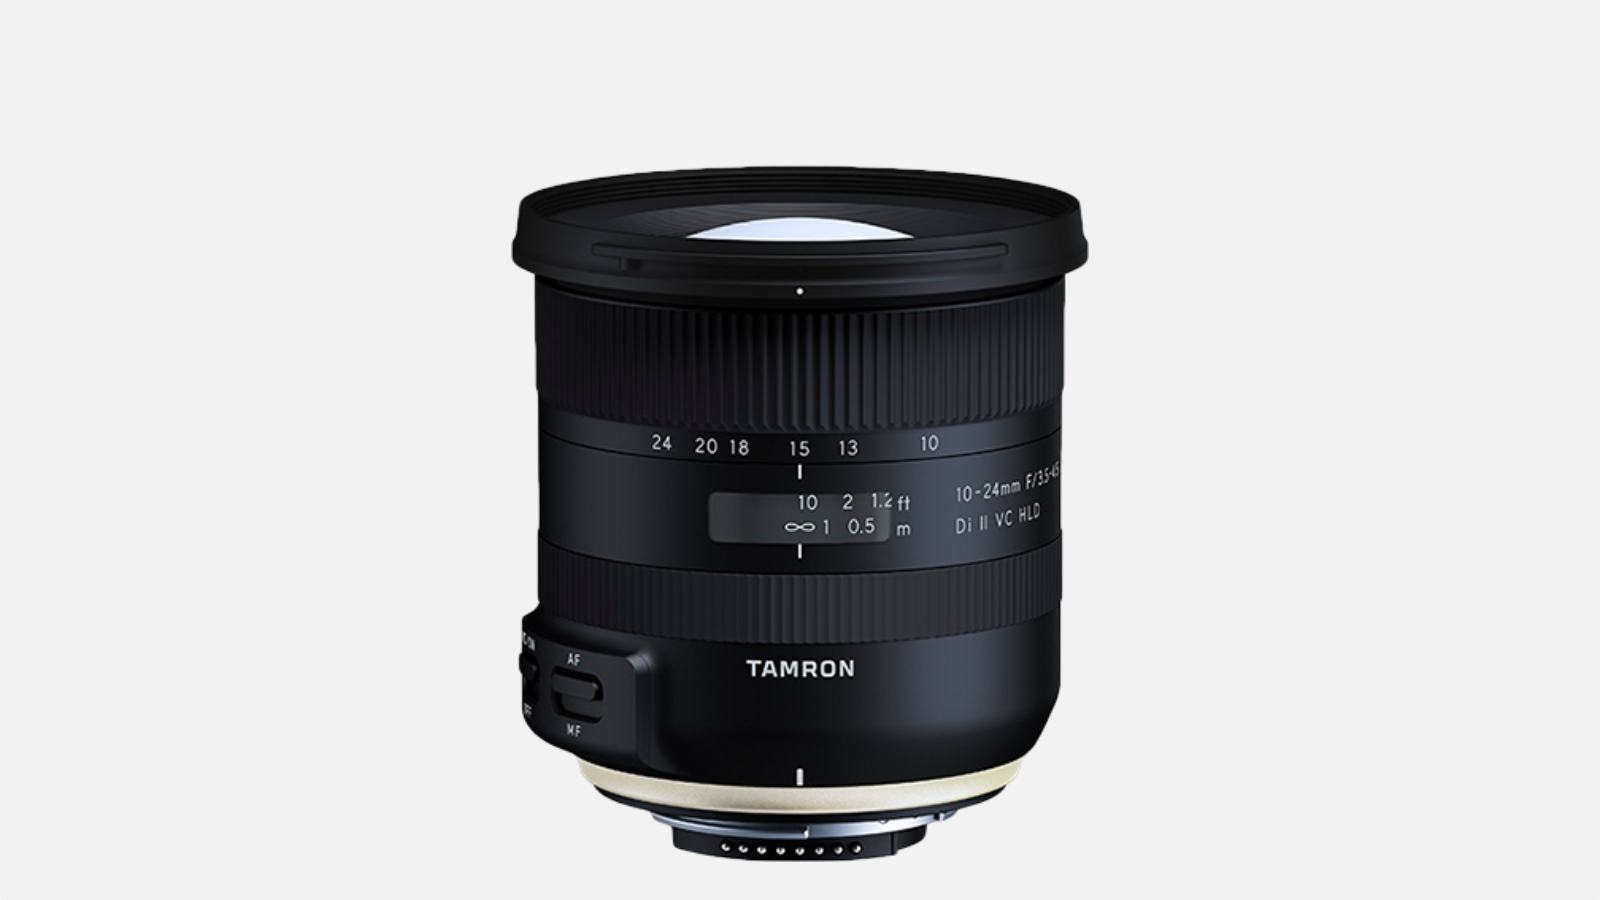 Tamron 10-24mm f/3.5-4.5 Di II VC HLD wide-angle lens on a plain background